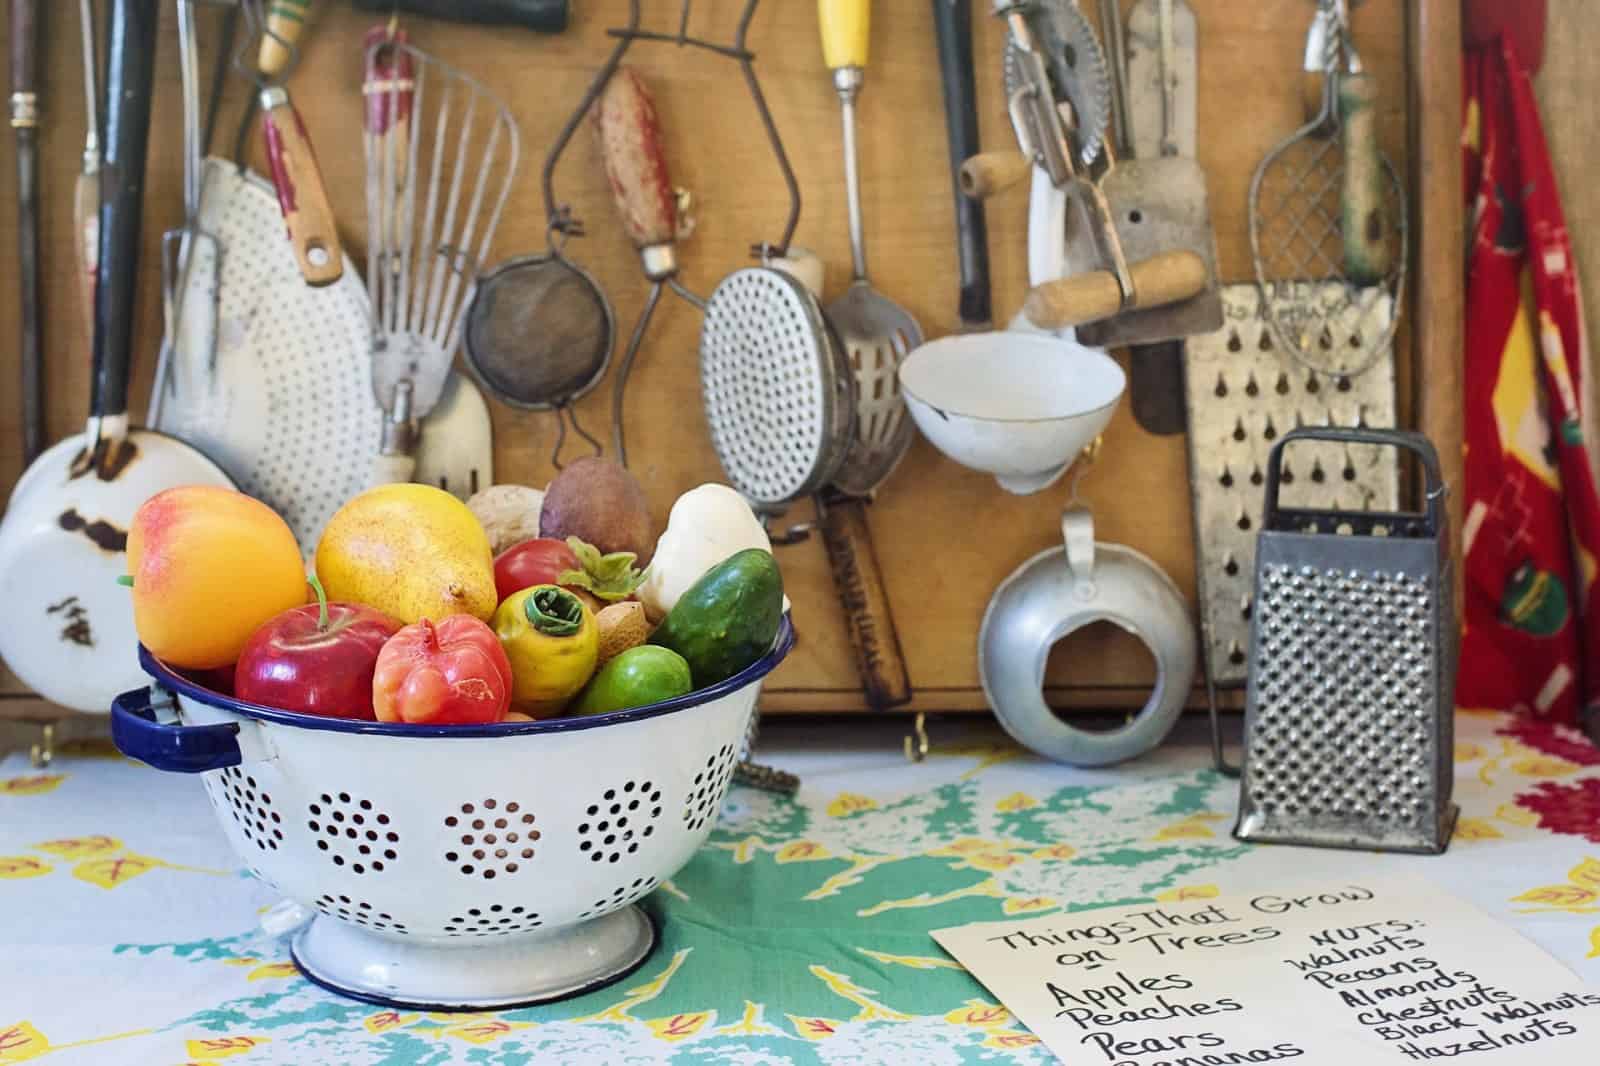 kitchen items and basket with veggies